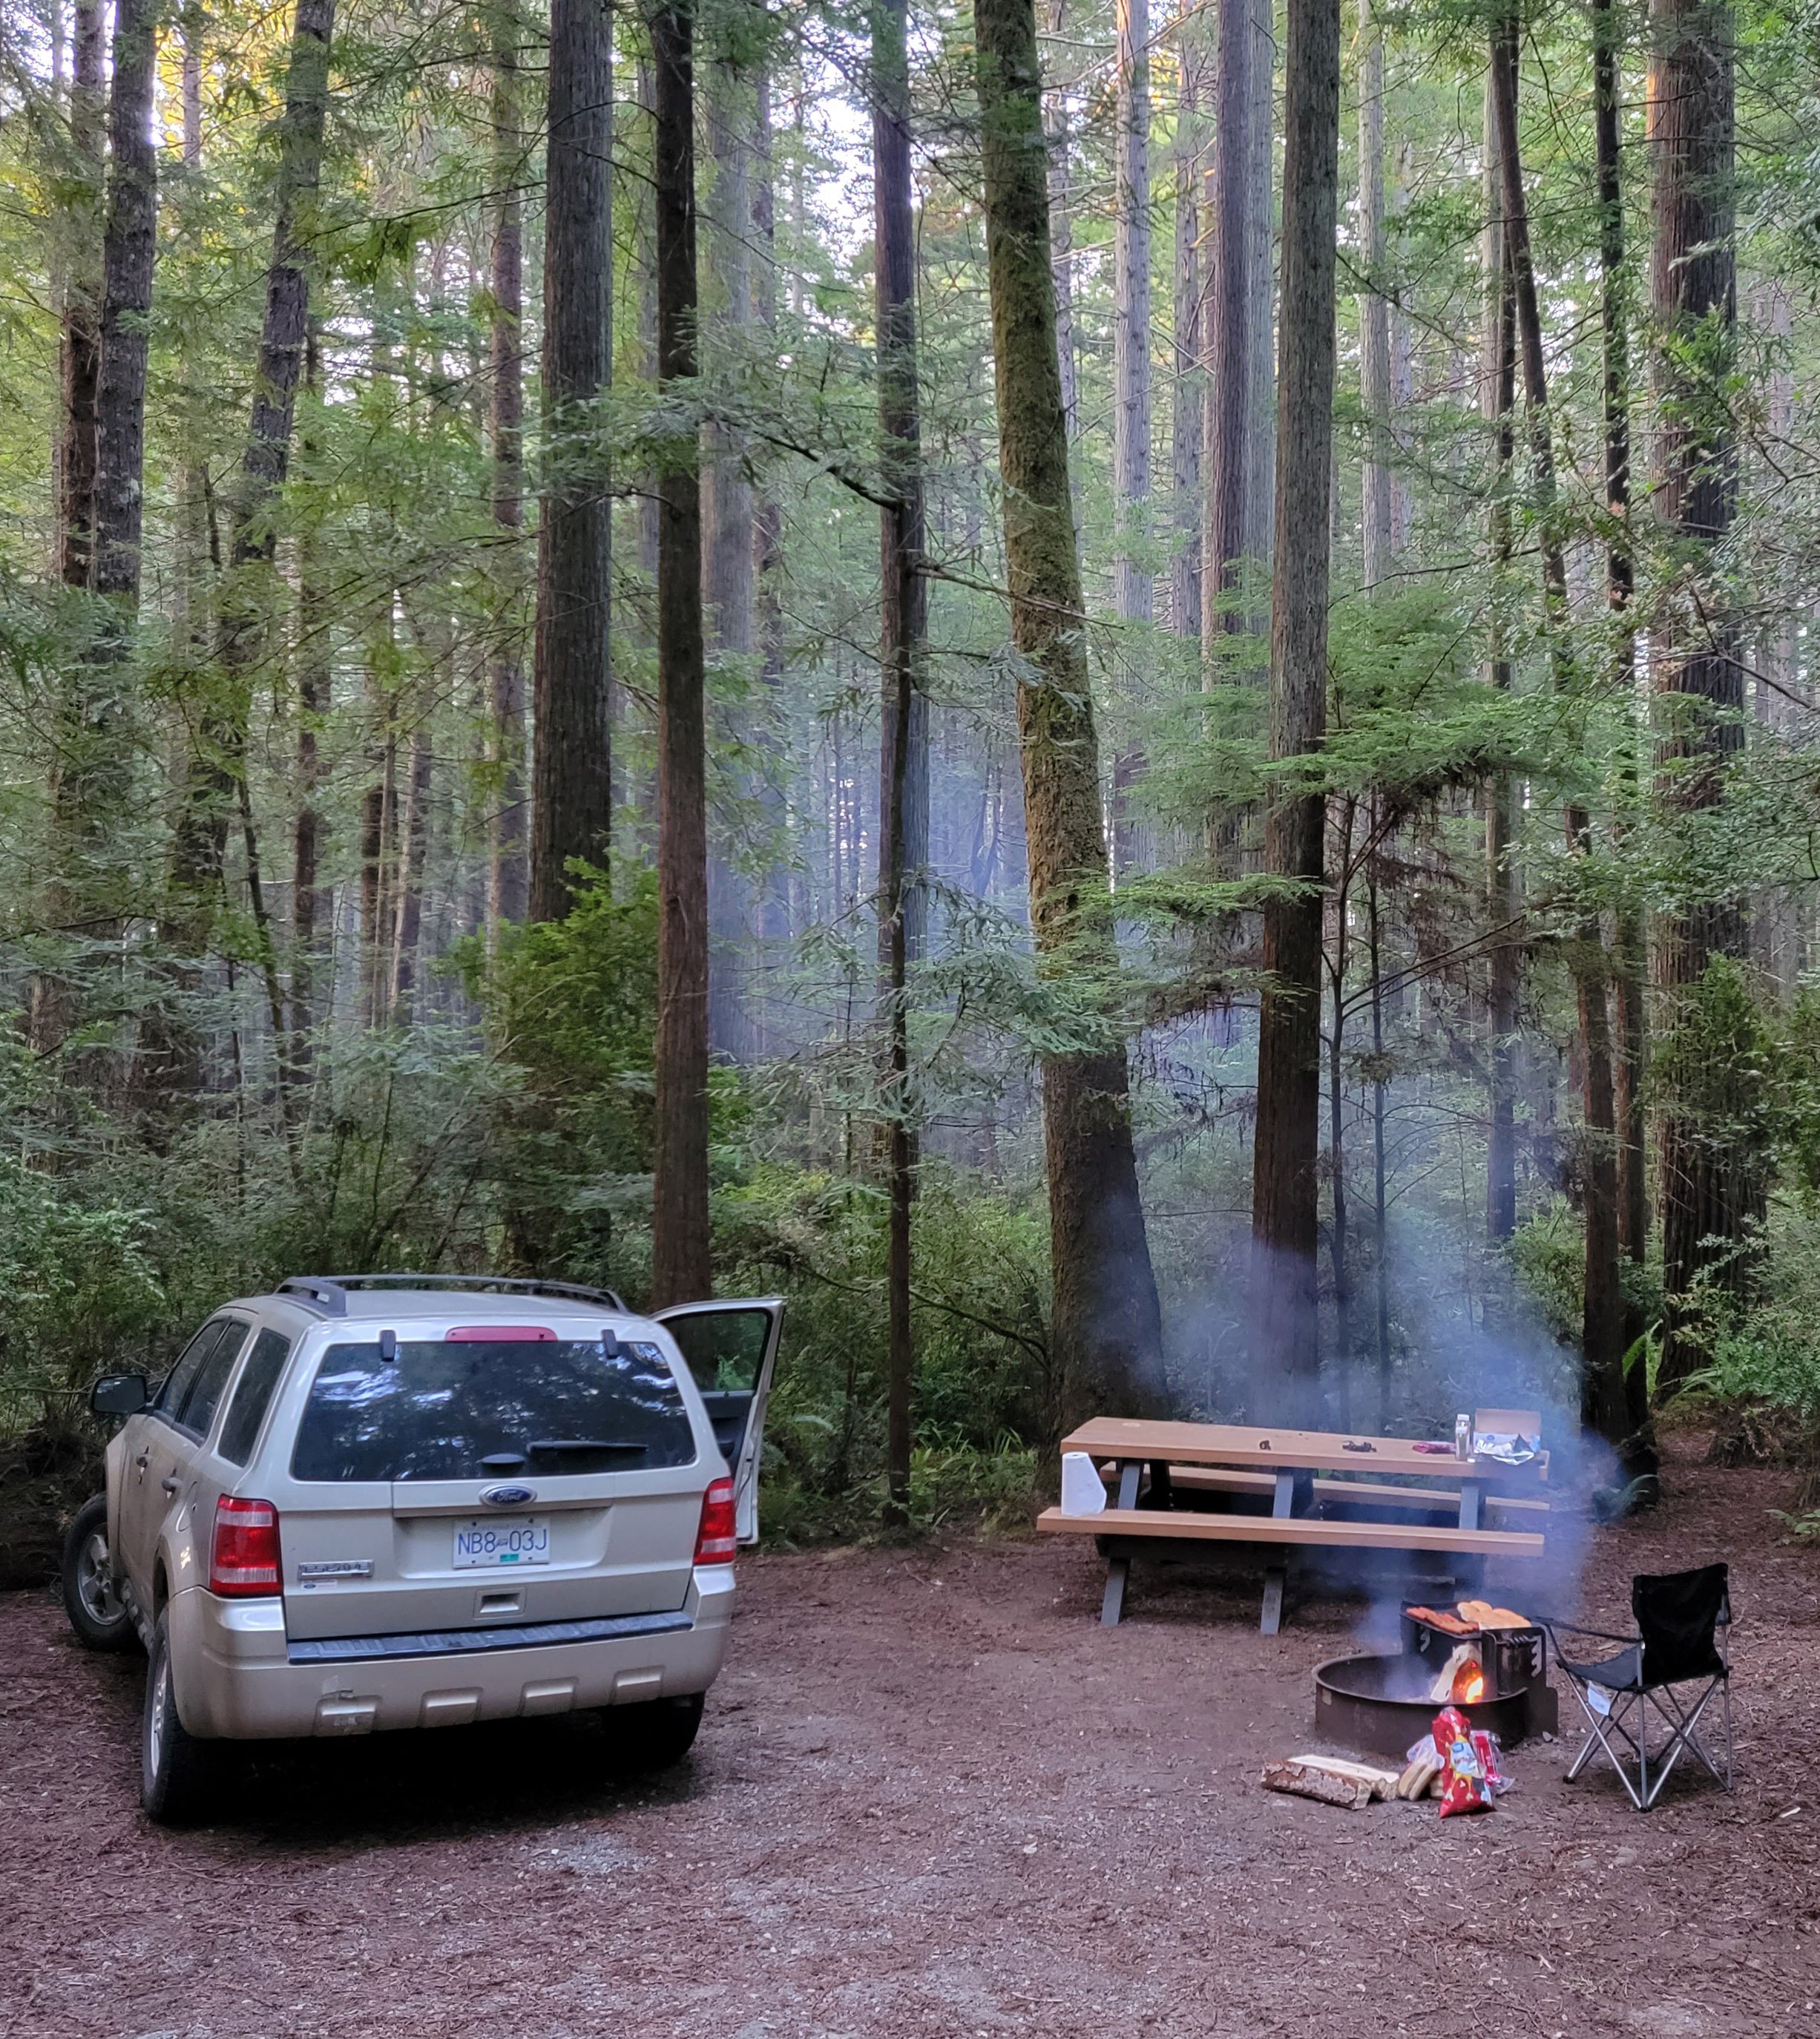 Decided to go camping in a small Redwood forest campground that night. Florence Keller Park, near Crescent City.